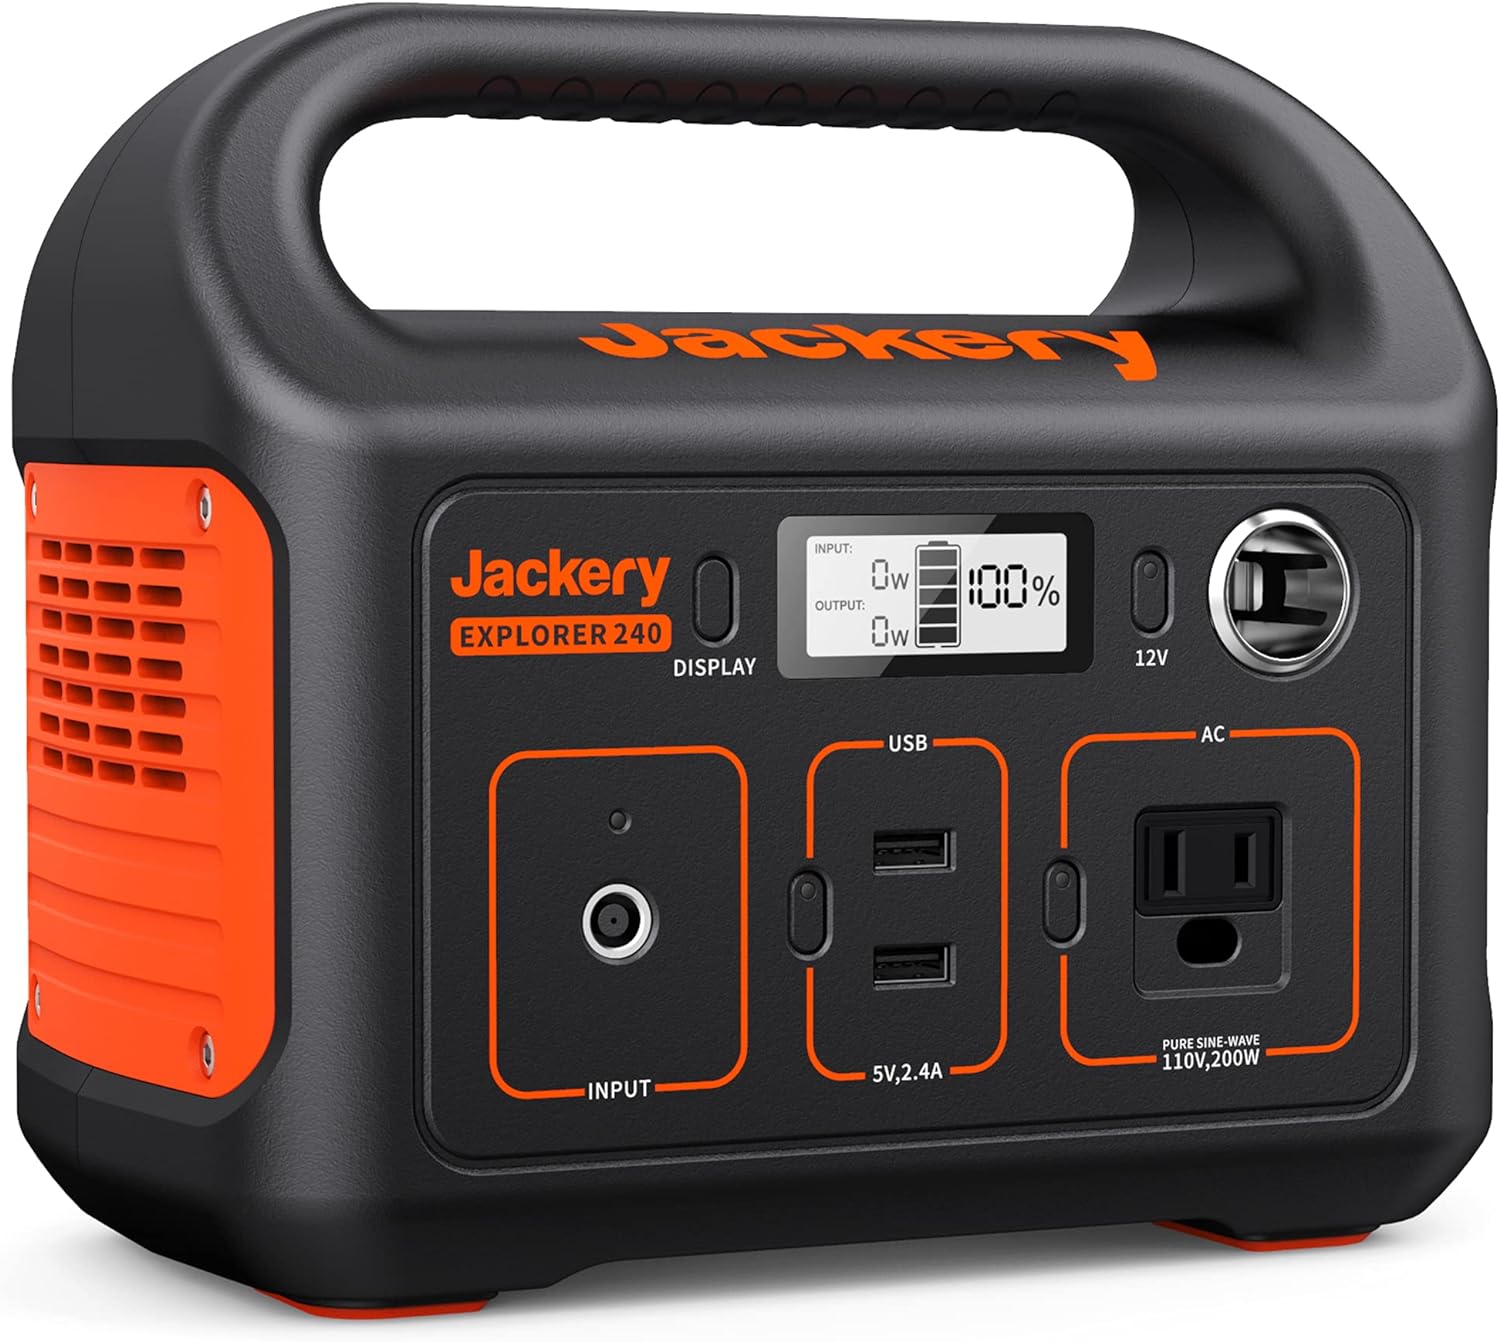 Jackery Portable Power Station Explorer 240, 240Wh Backup Lithium Battery, 110V/200W Pure Sine Wave AC Outlet, Solar Generator for Outdoors Camping Travel Hunting Emergency (Solar Panel Optional) - image 1 of 5